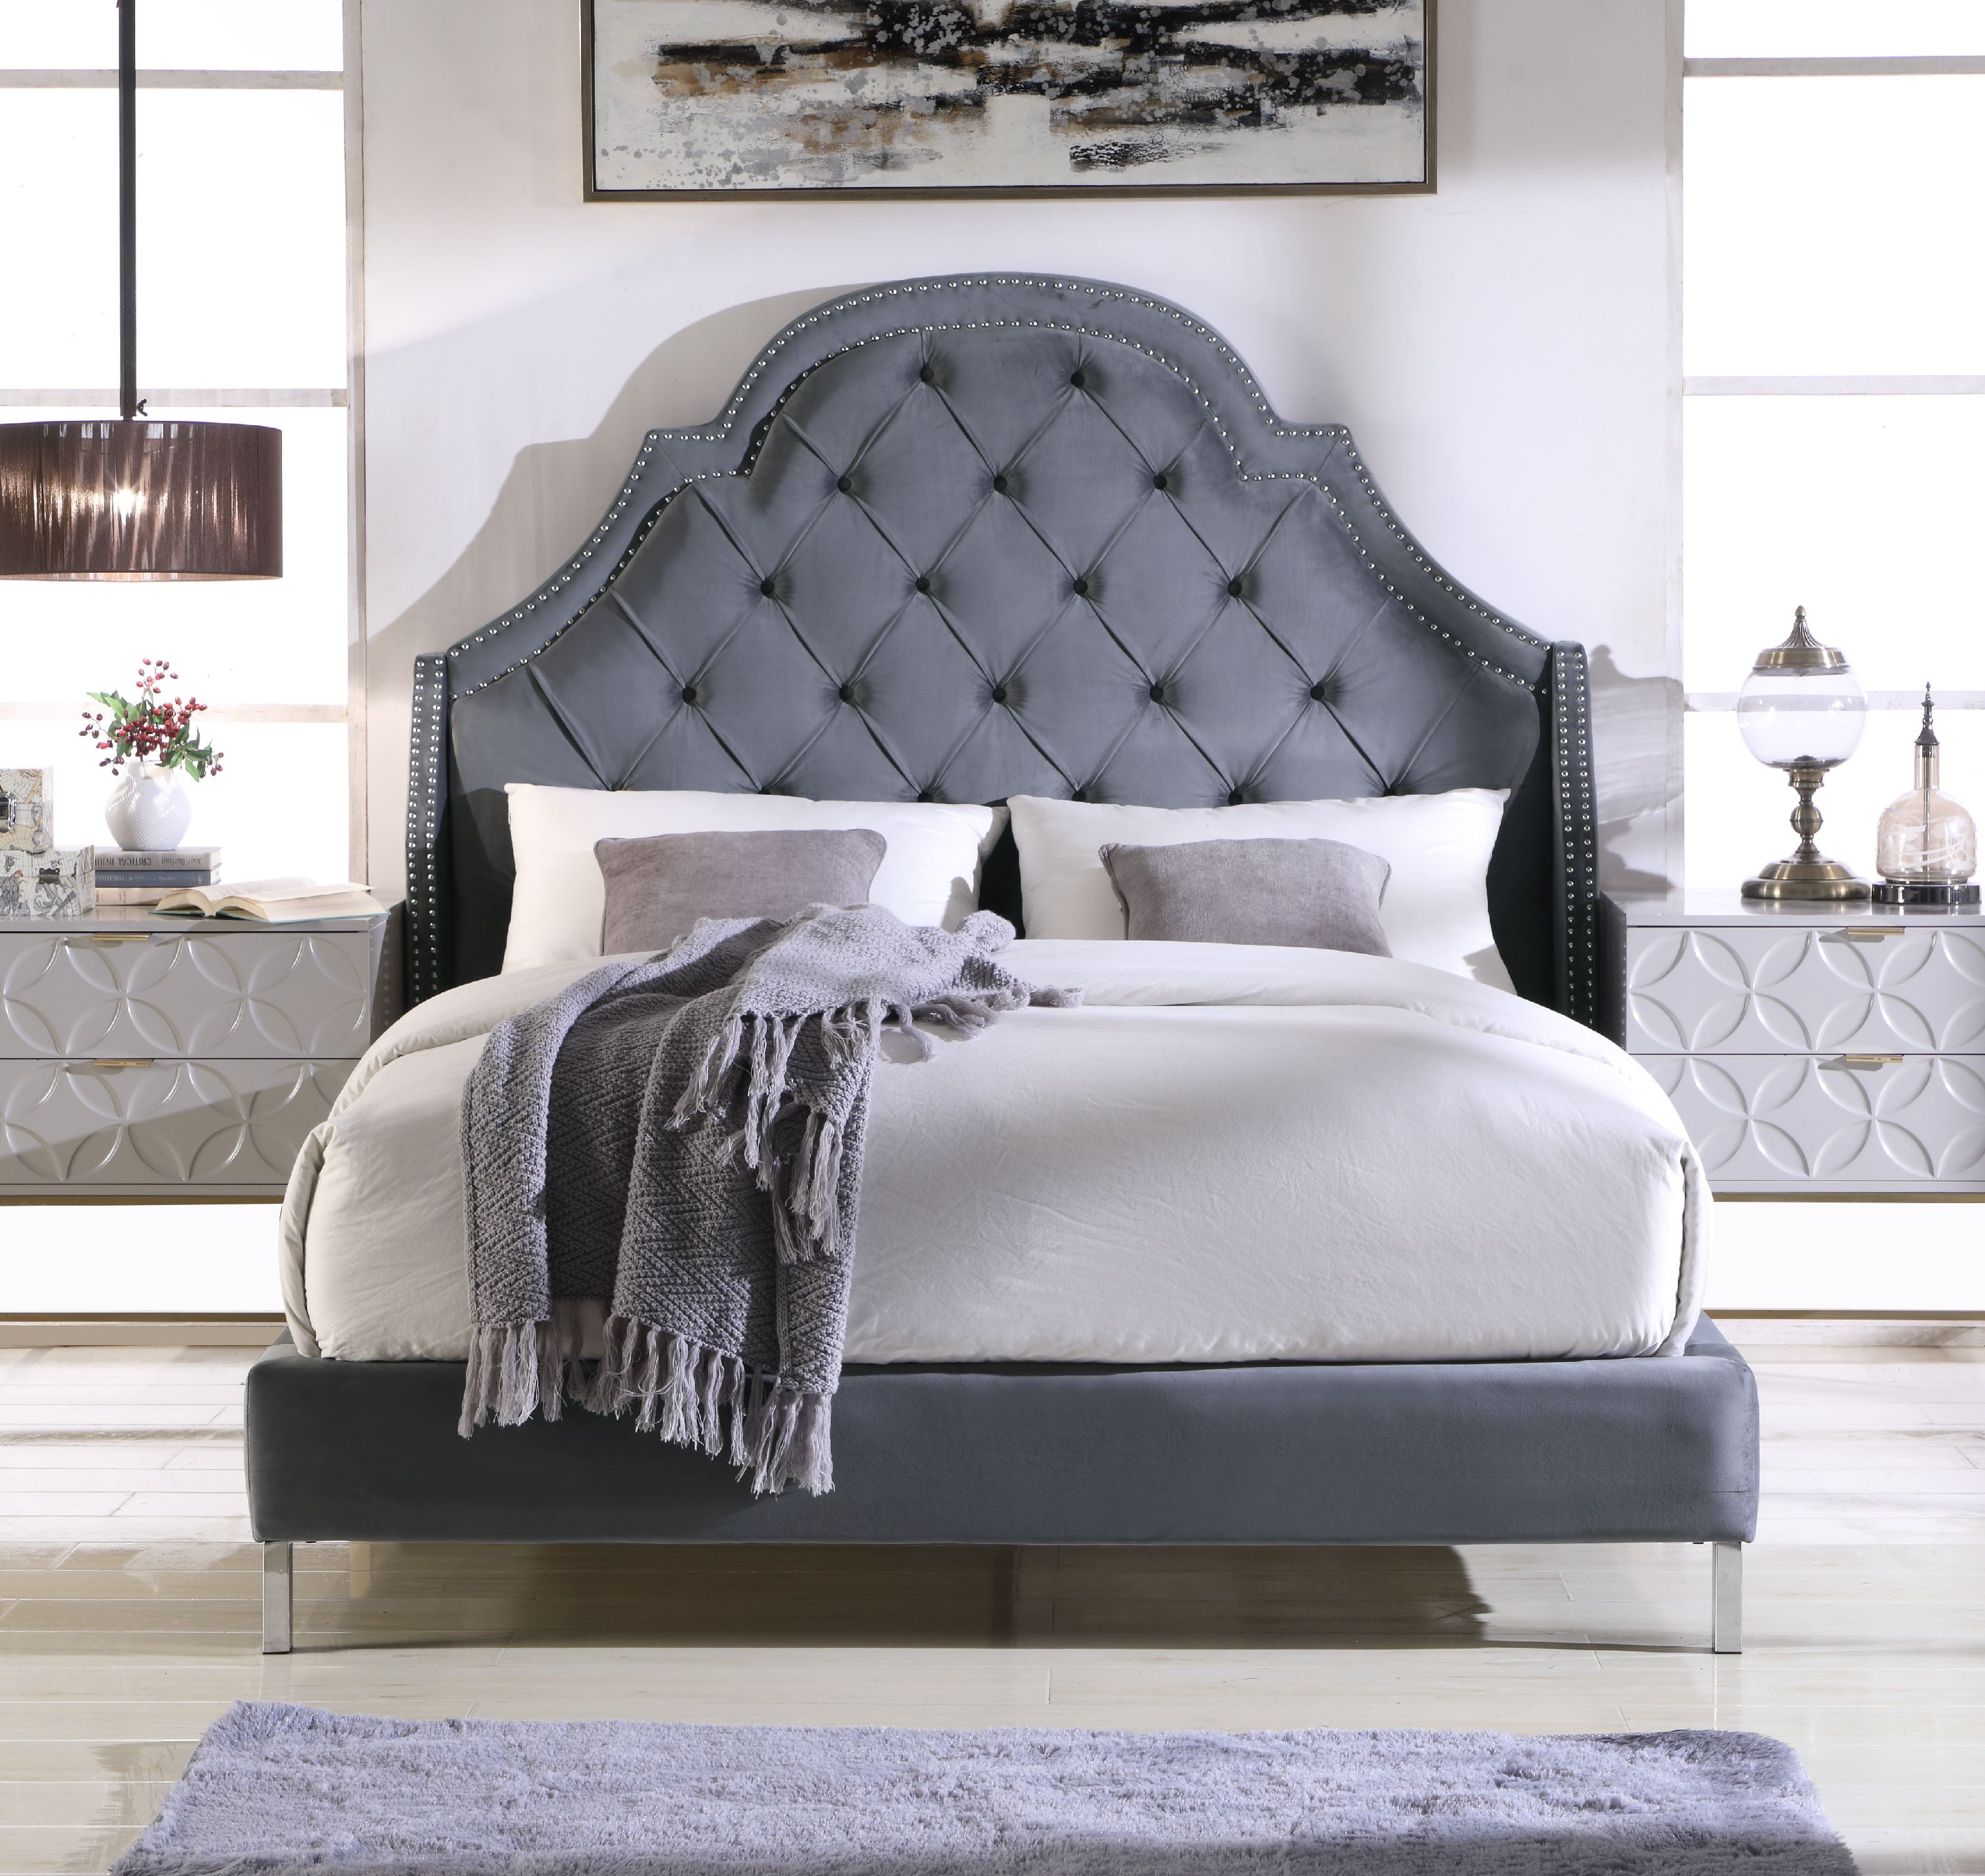 Picture of Chic Home FBD9158-US Queen Size Modern Transitional Constantine Bed Frame - Grey - 65.7 x 70.6 x 87.2 in.